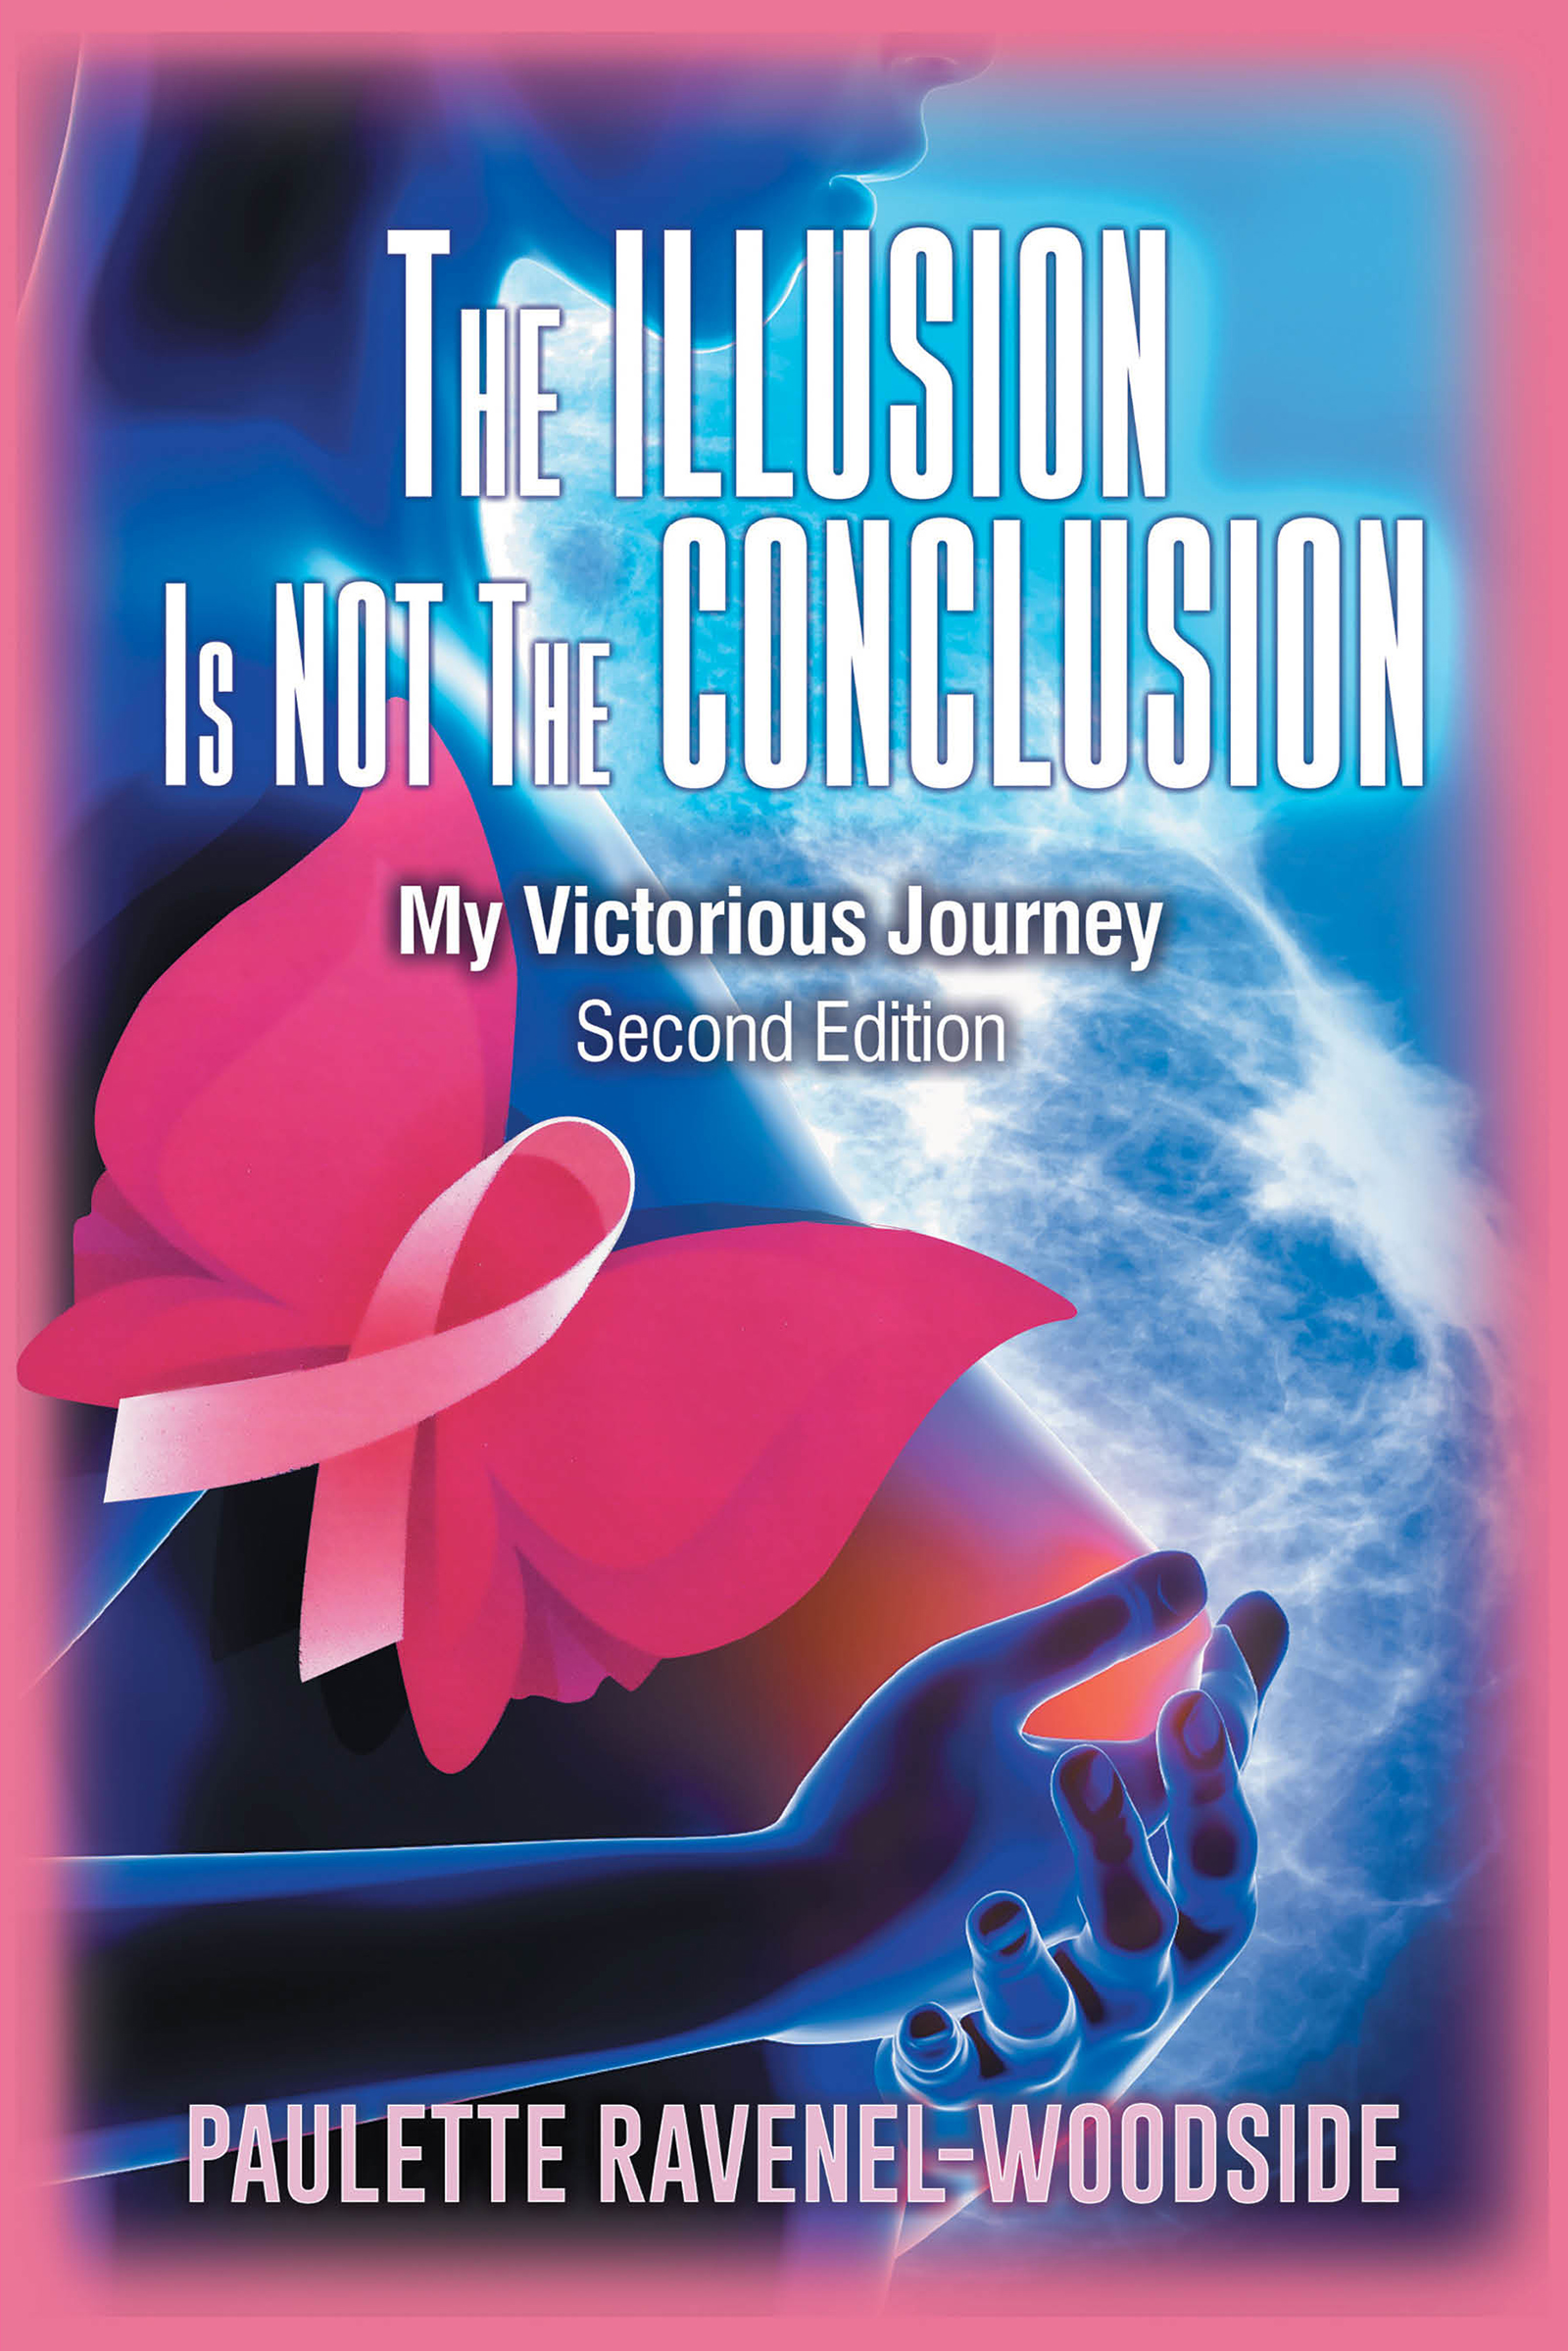 A book that shines a light for Cancer and Faith